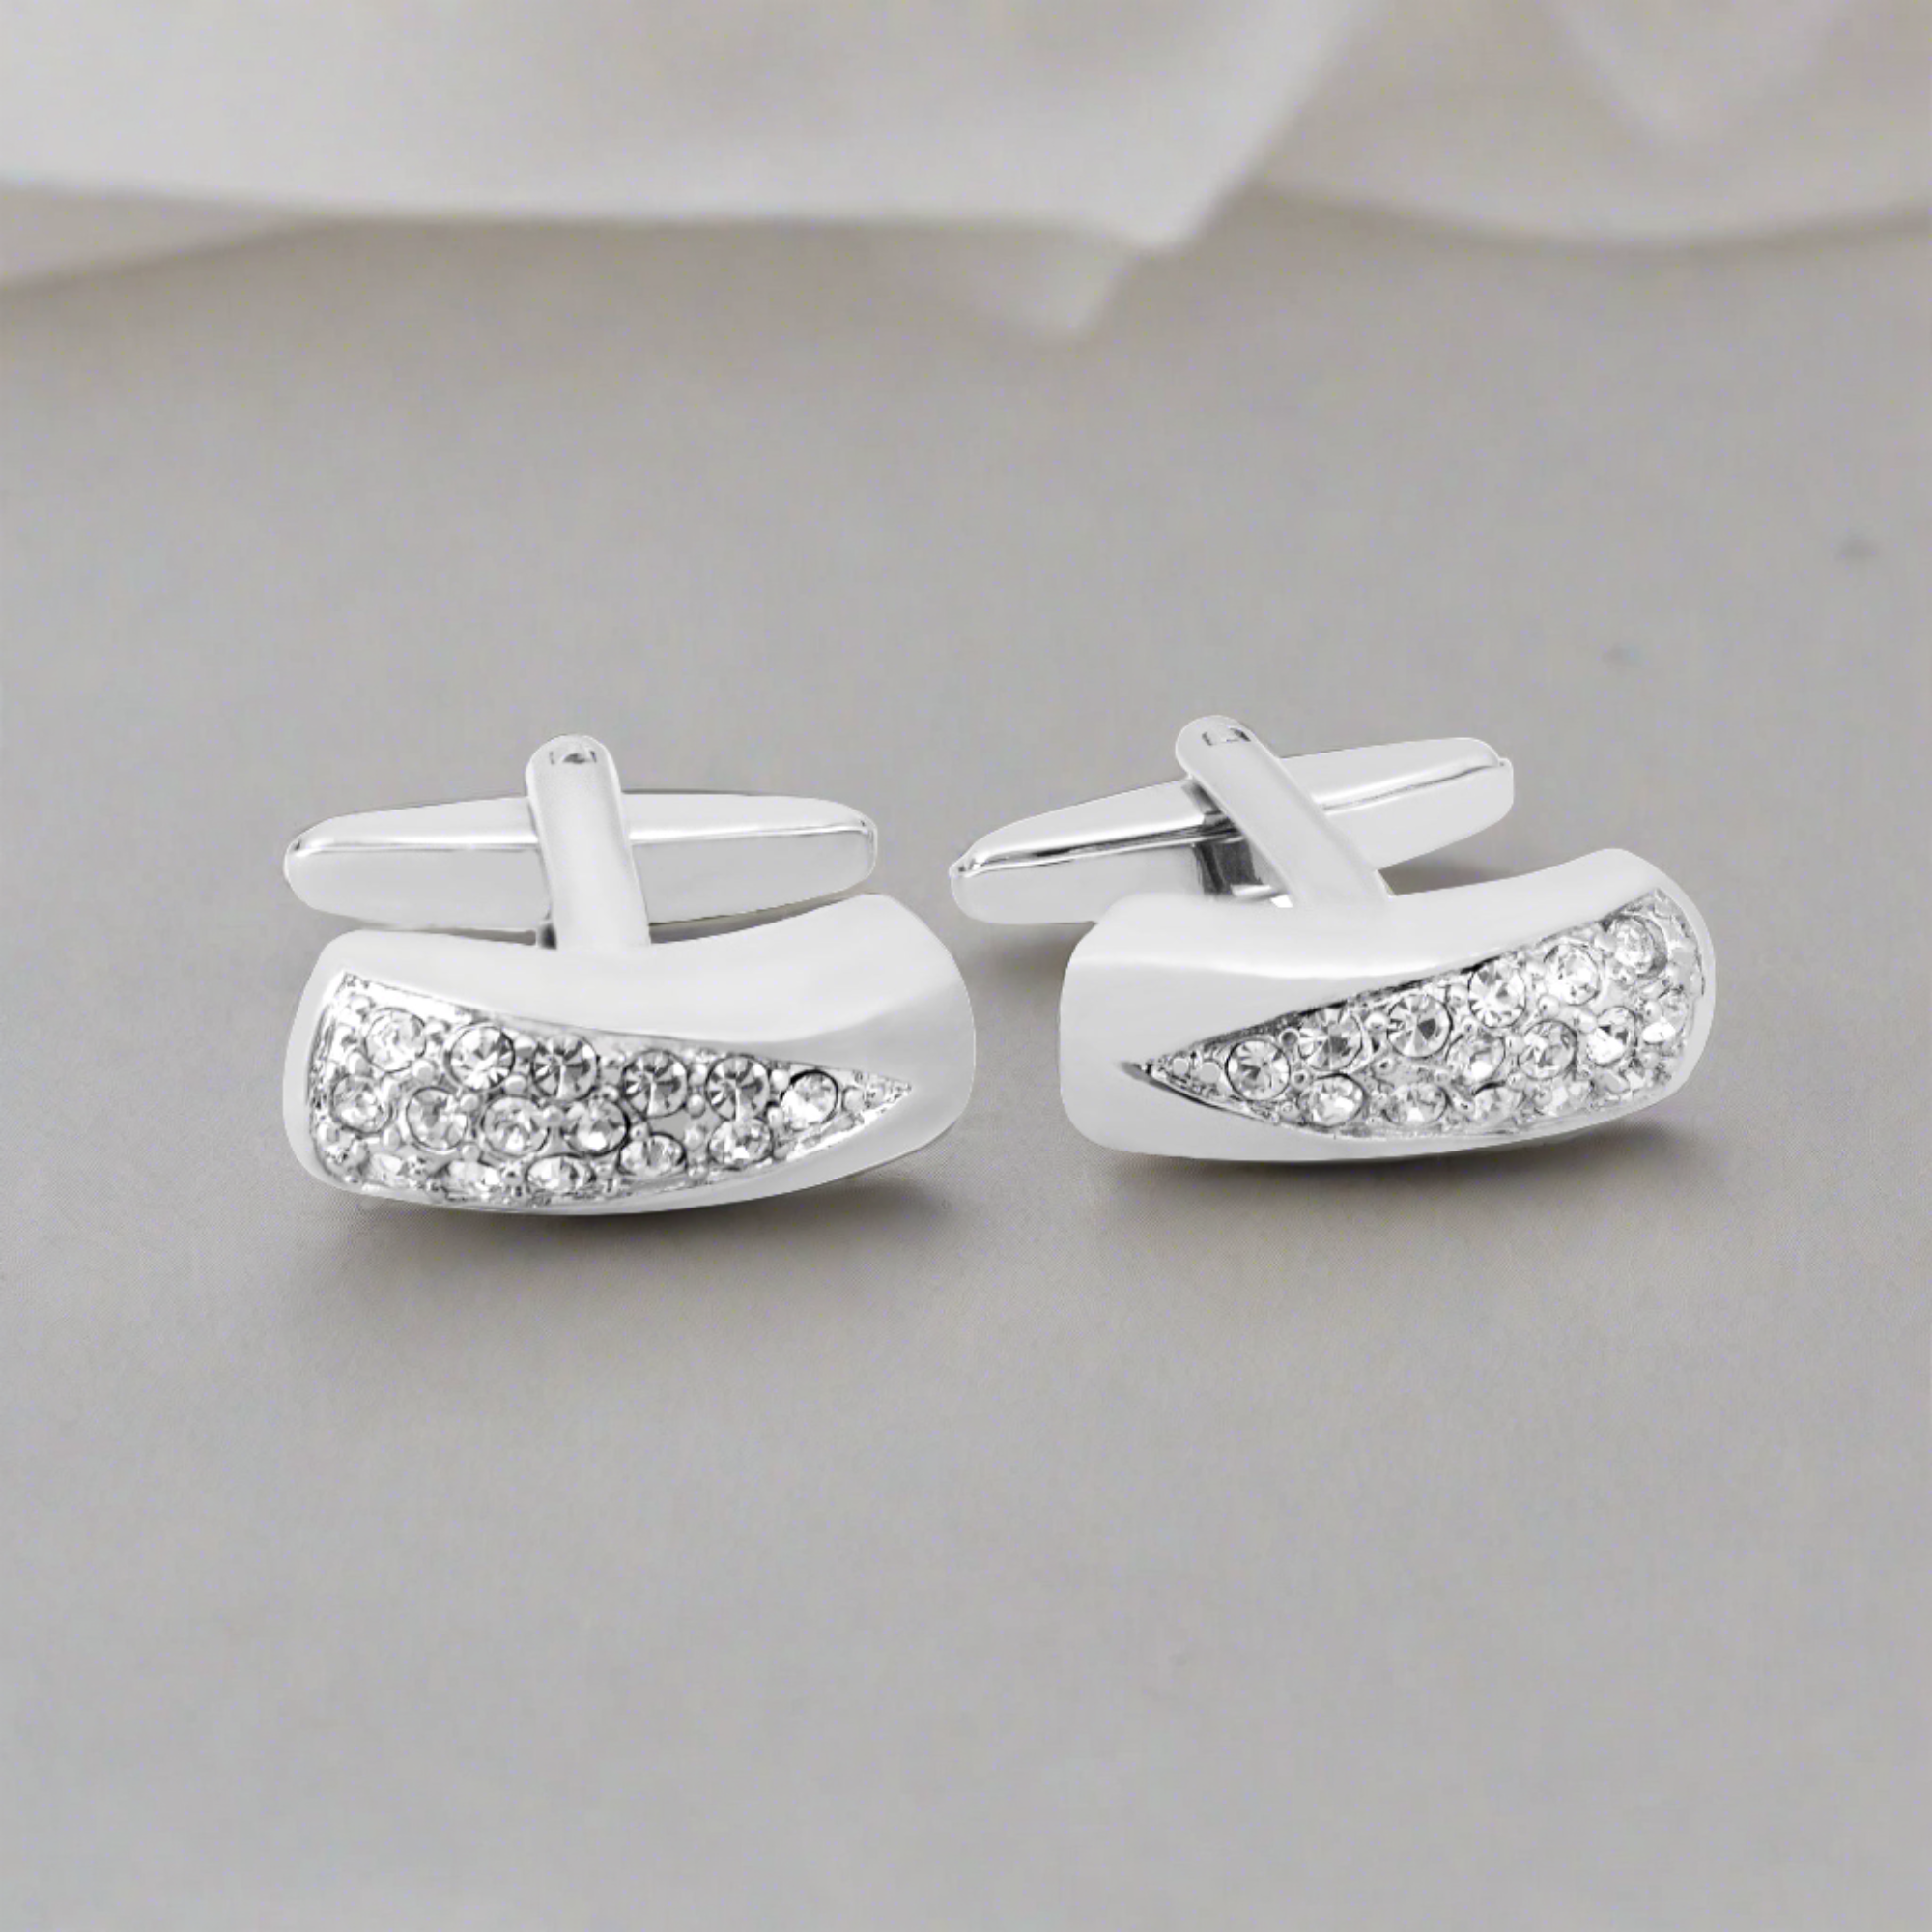 Simple Rectangle Curved Cufflinks with Clear Crystals